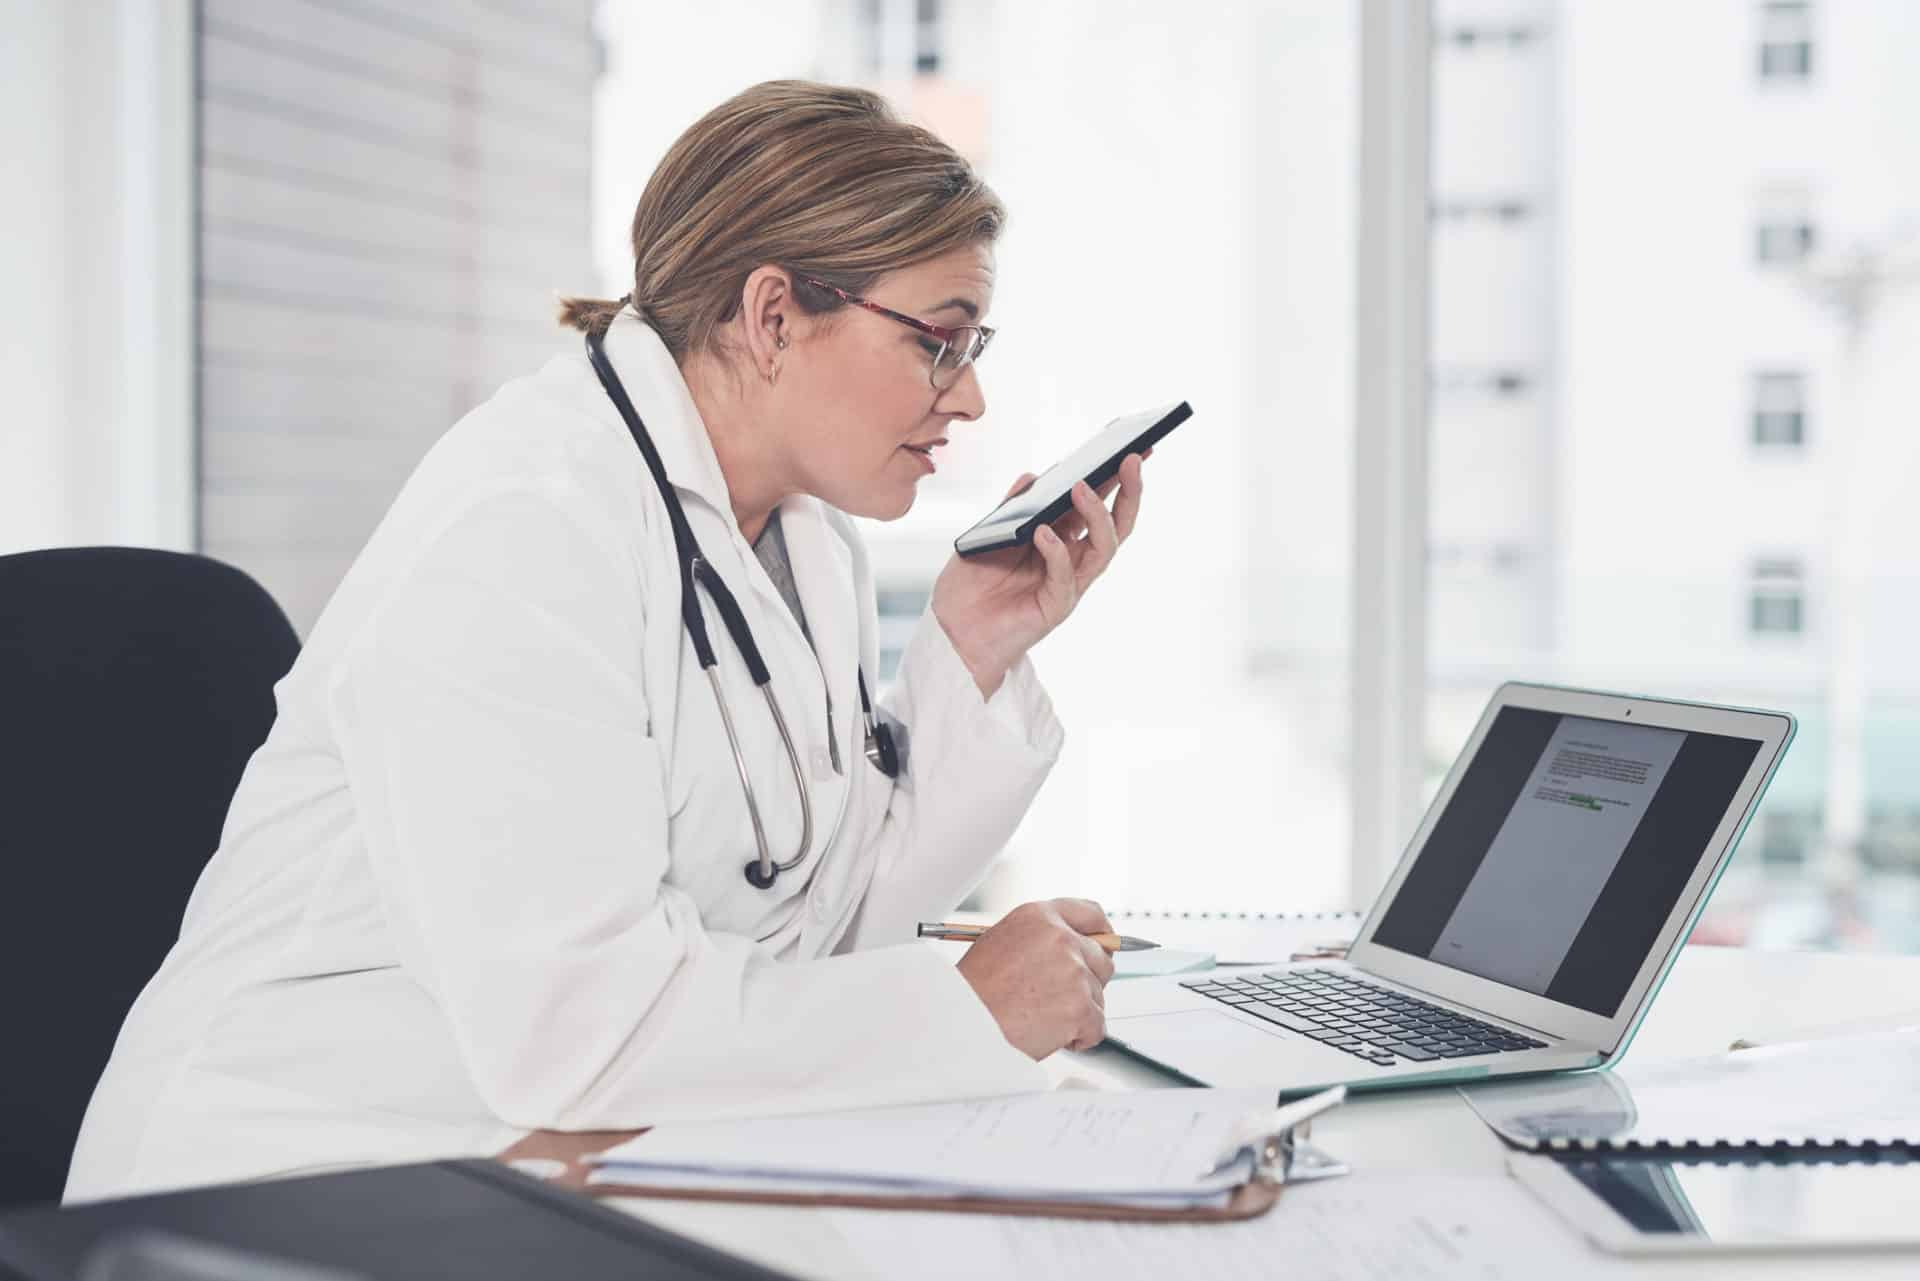 Are Your Medical Practice’s Mobile Devices Properly Managed?